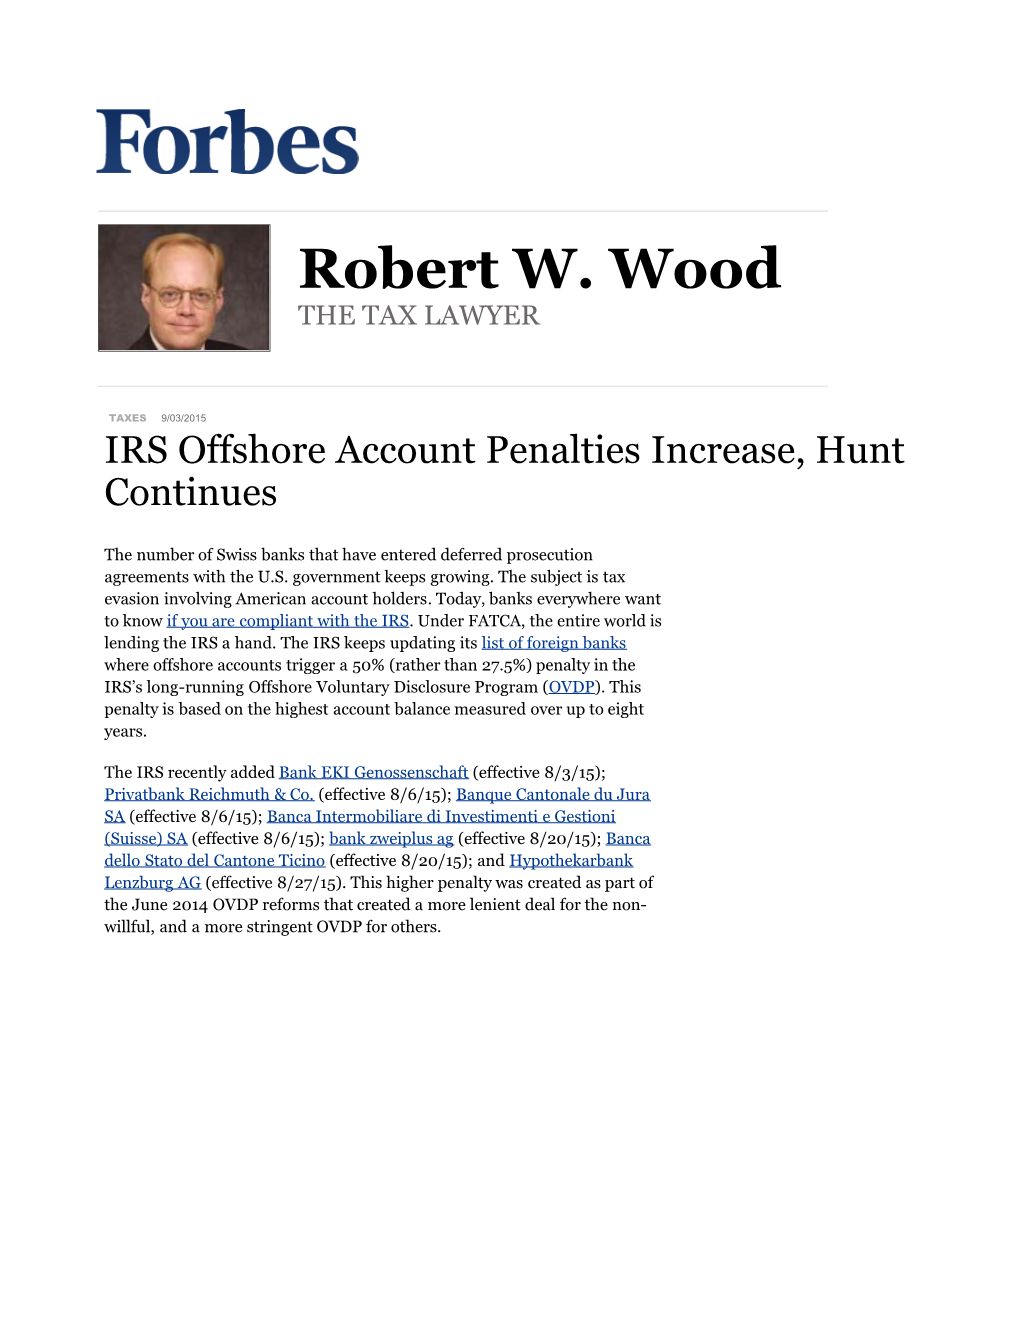 IRS Offshore Account Penalties Increase, Hunt Continues